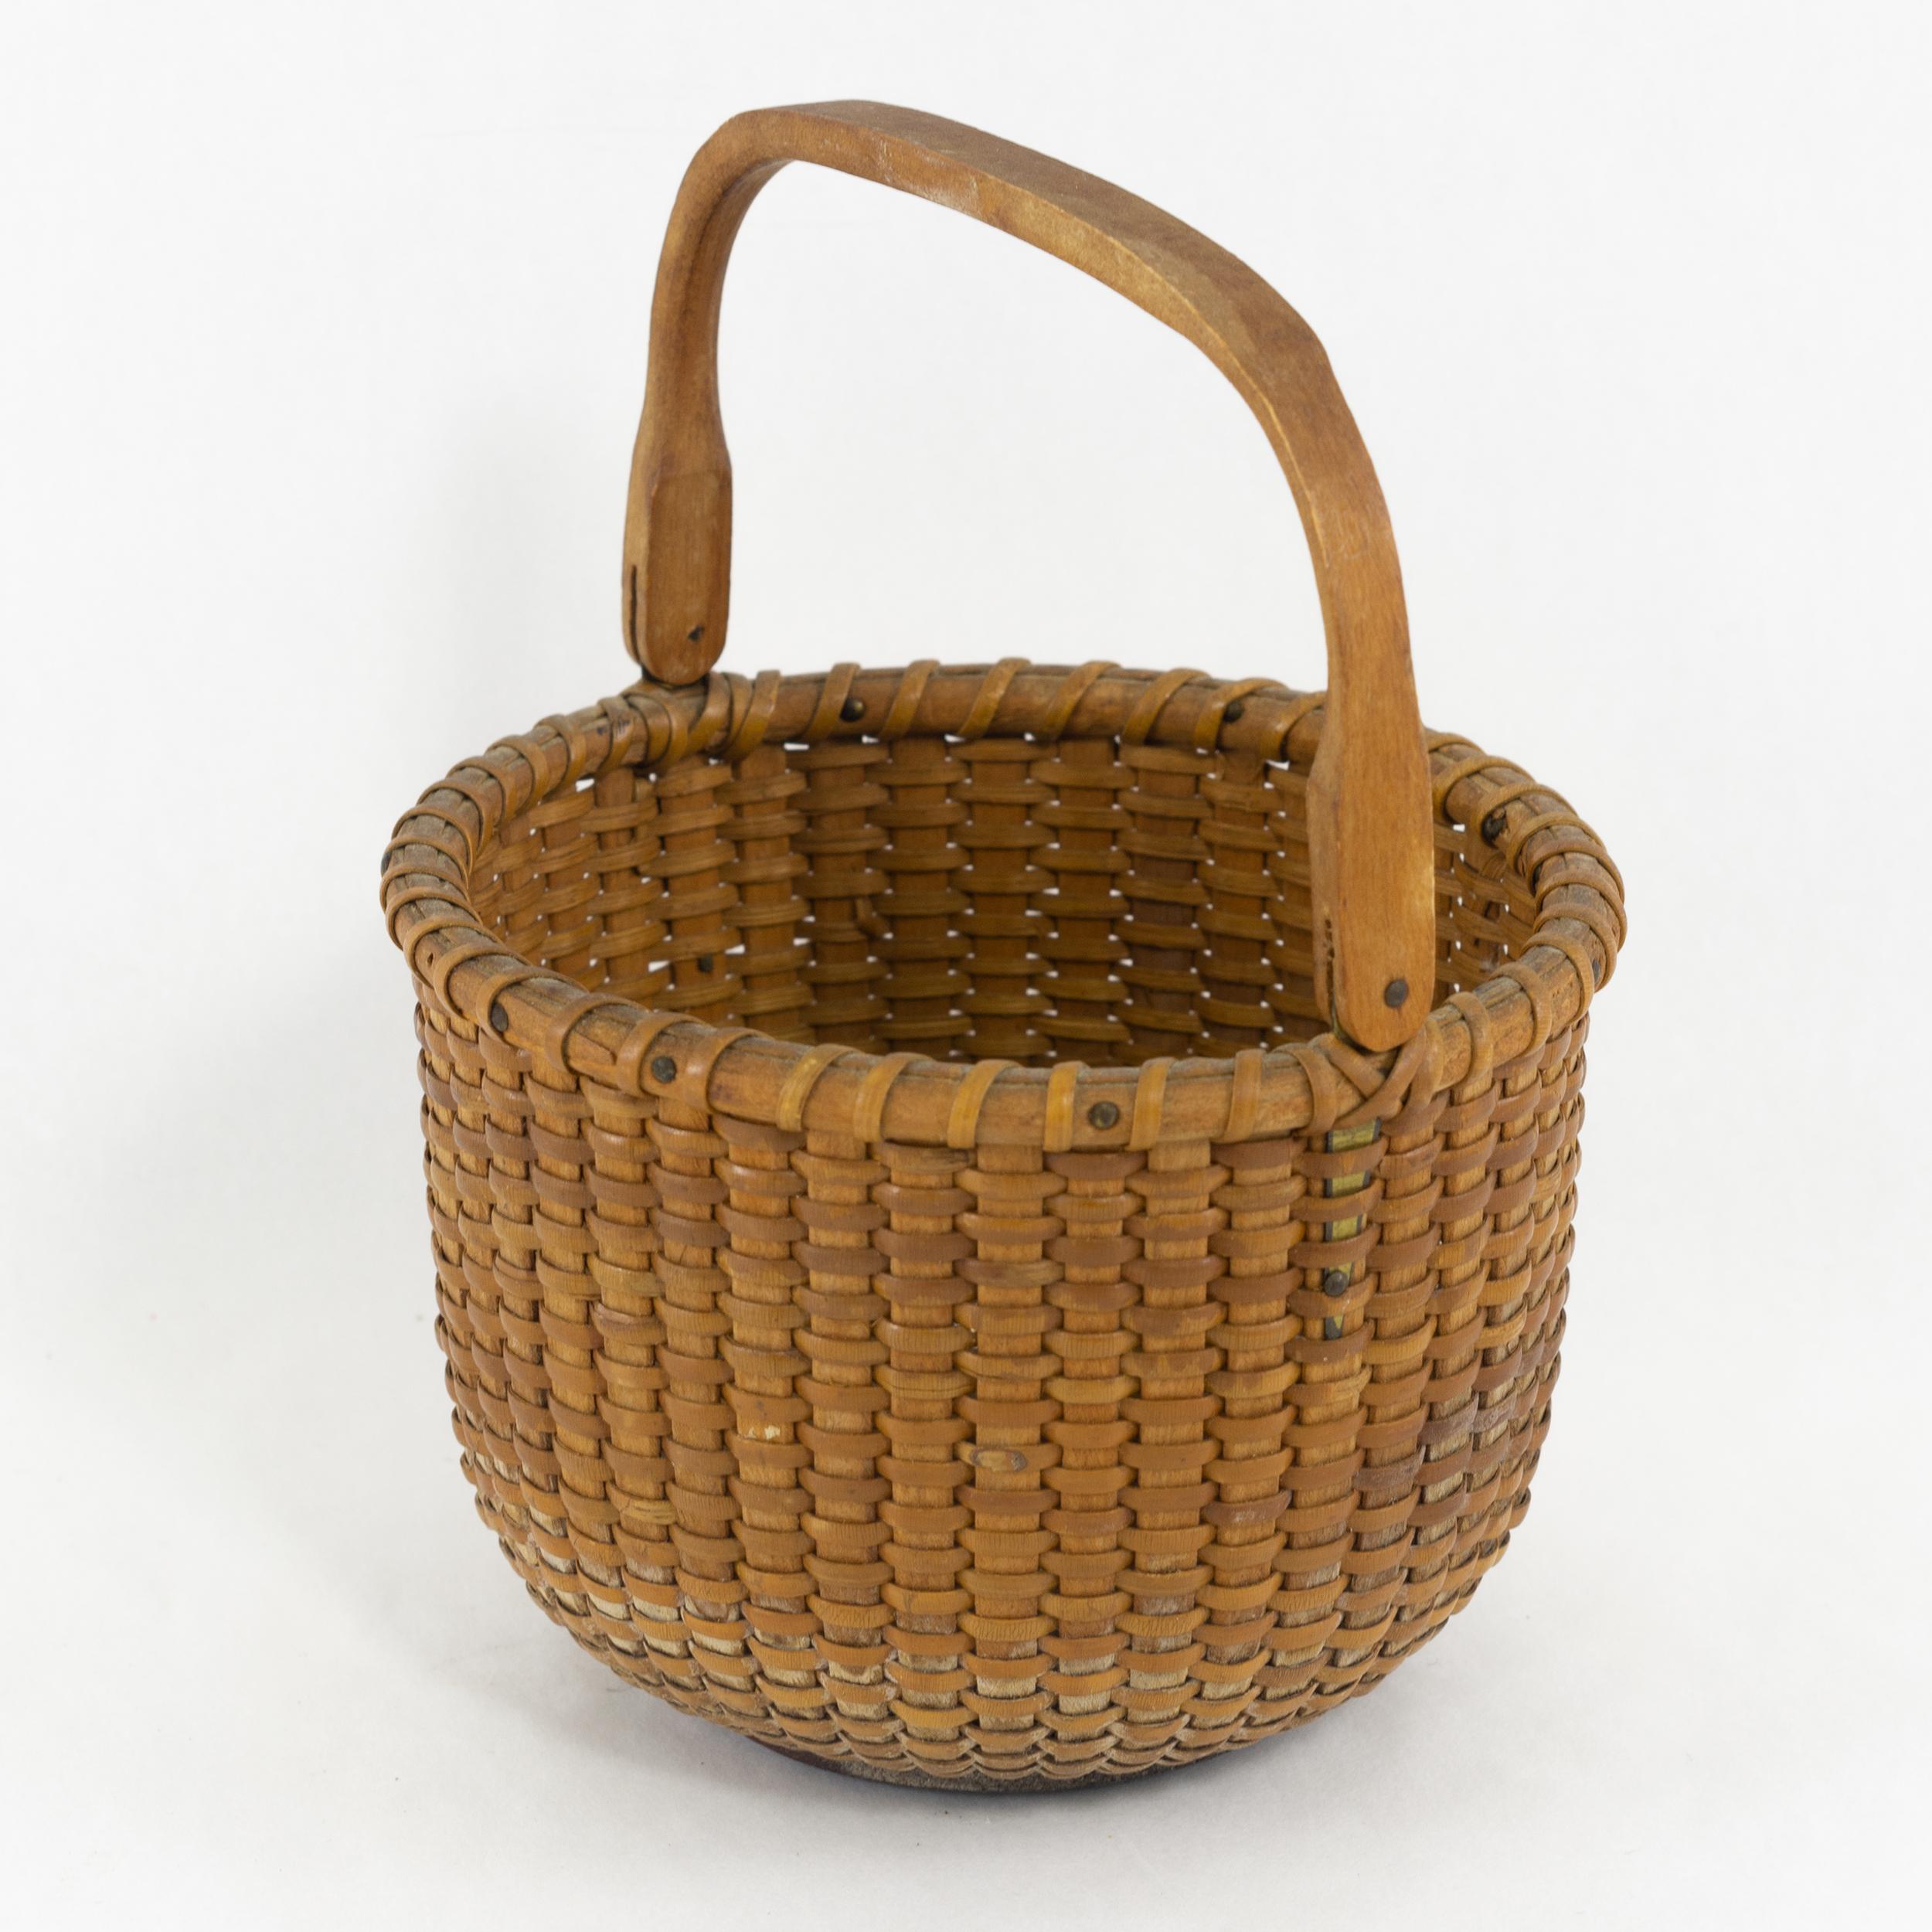 A great basket in excellent condition made by Sherwin Porter Boyer (1907-1964). Made with oak staves and carved oak handle that is attached with brass ears. The basket bears Boyers stamp on the bottom.
Sherwin Boyer was one of the first generation